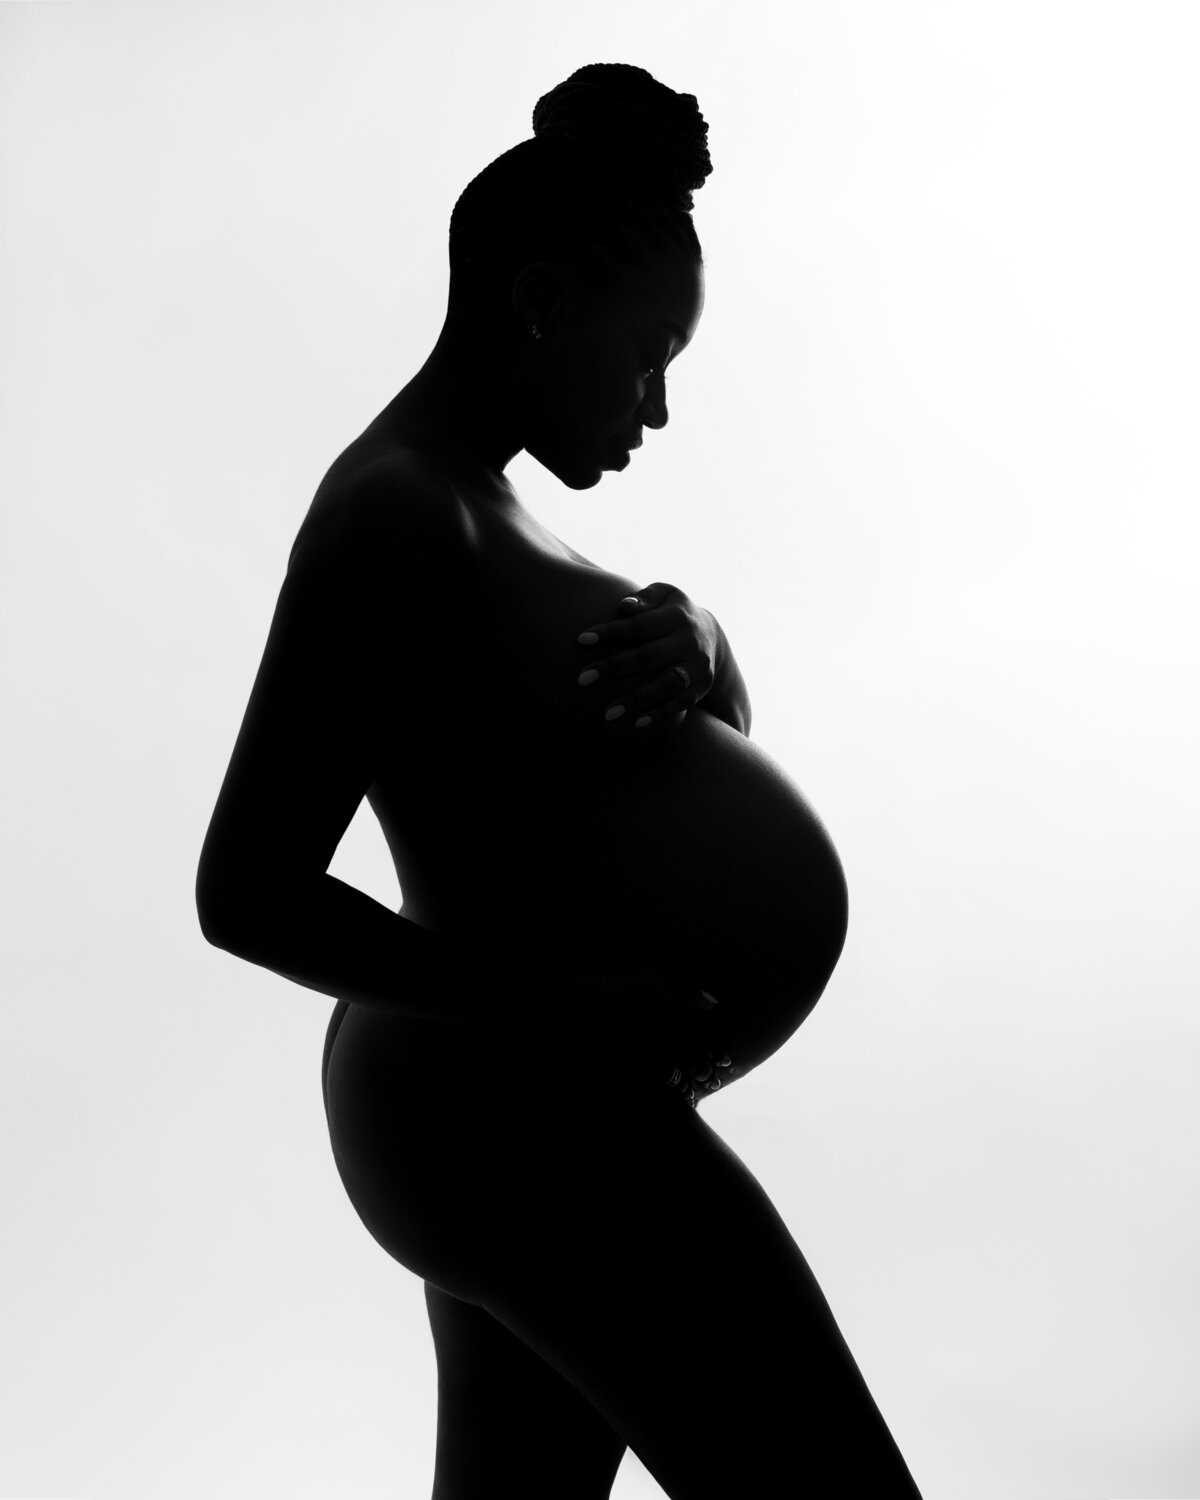 Artistic maternity portrait in silhouette by Daisy Rey Photography in NJ